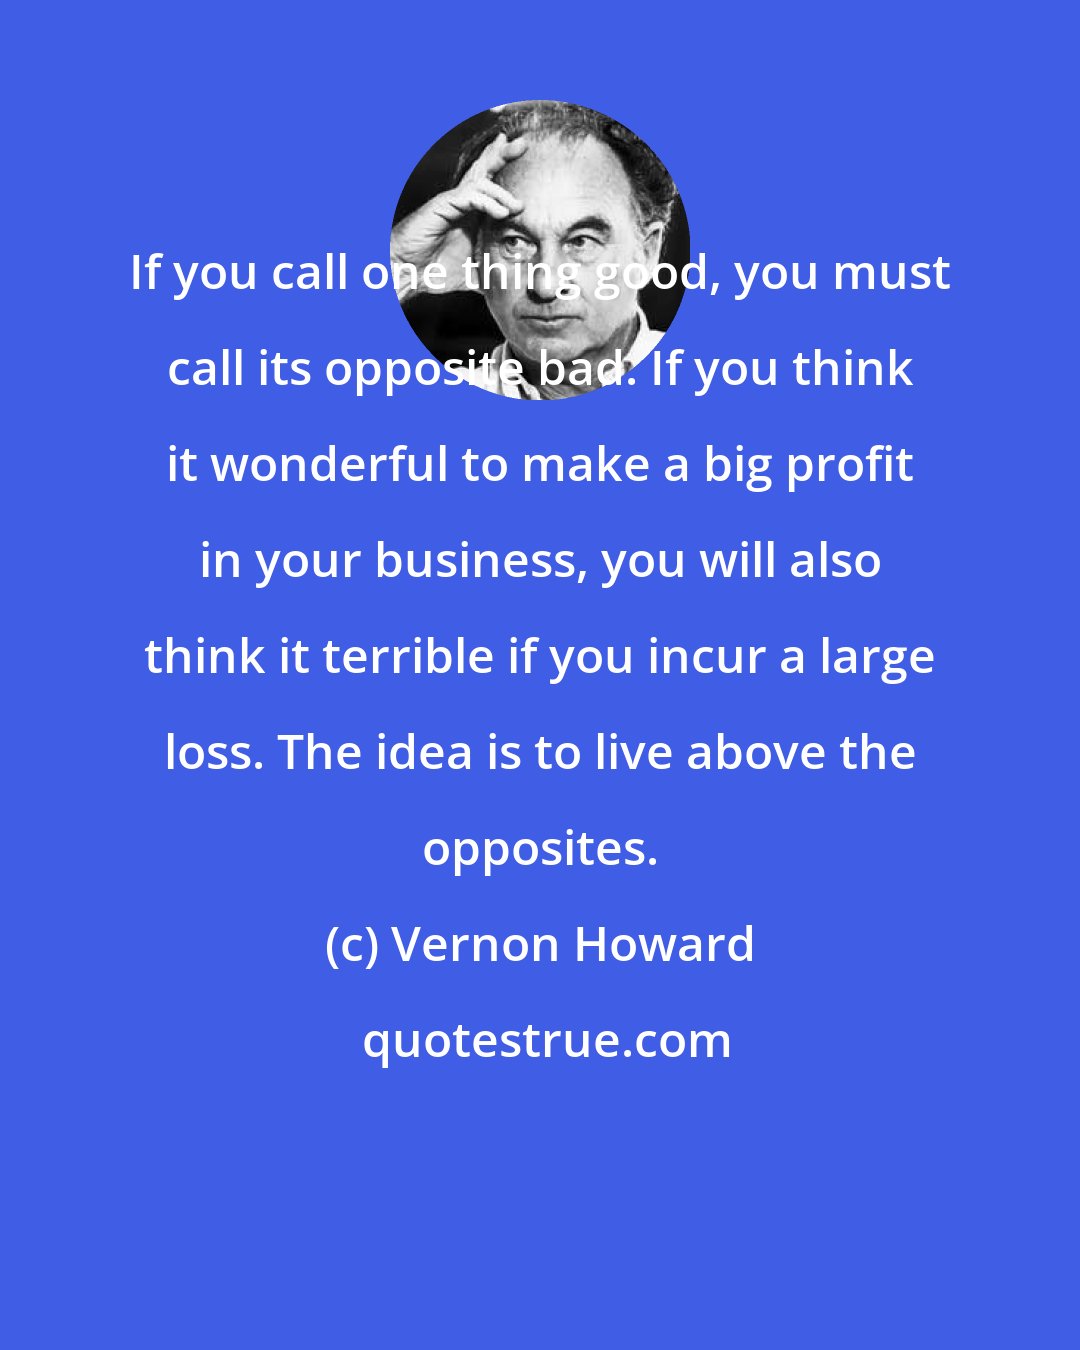 Vernon Howard: If you call one thing good, you must call its opposite bad. If you think it wonderful to make a big profit in your business, you will also think it terrible if you incur a large loss. The idea is to live above the opposites.